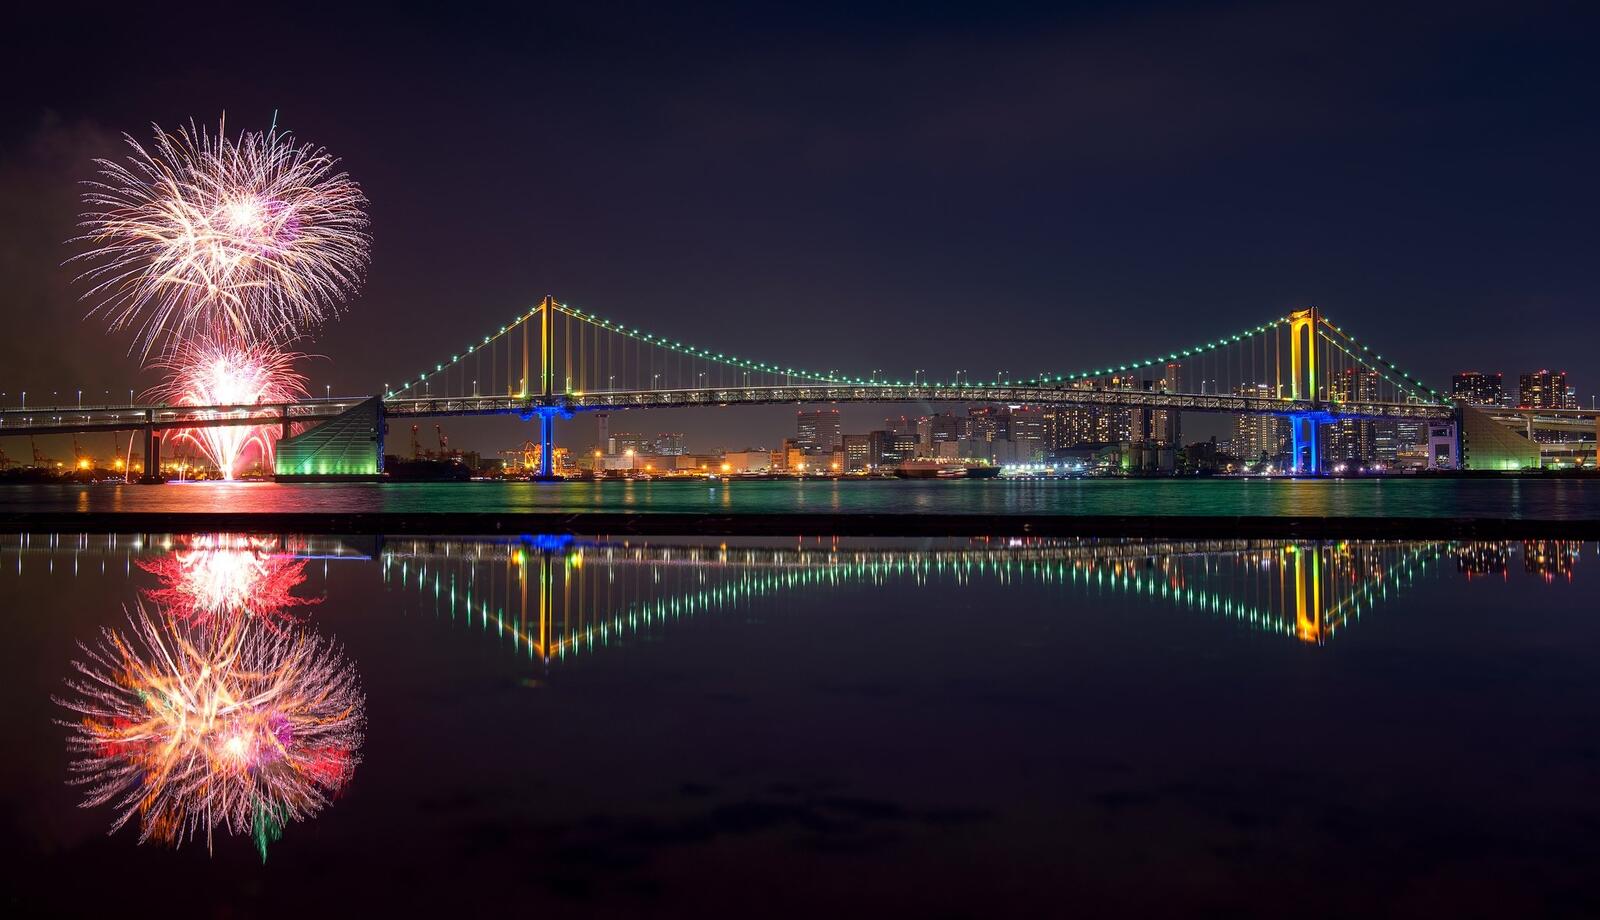 Free photo Night Bridge in Japan with a festive fireworks display